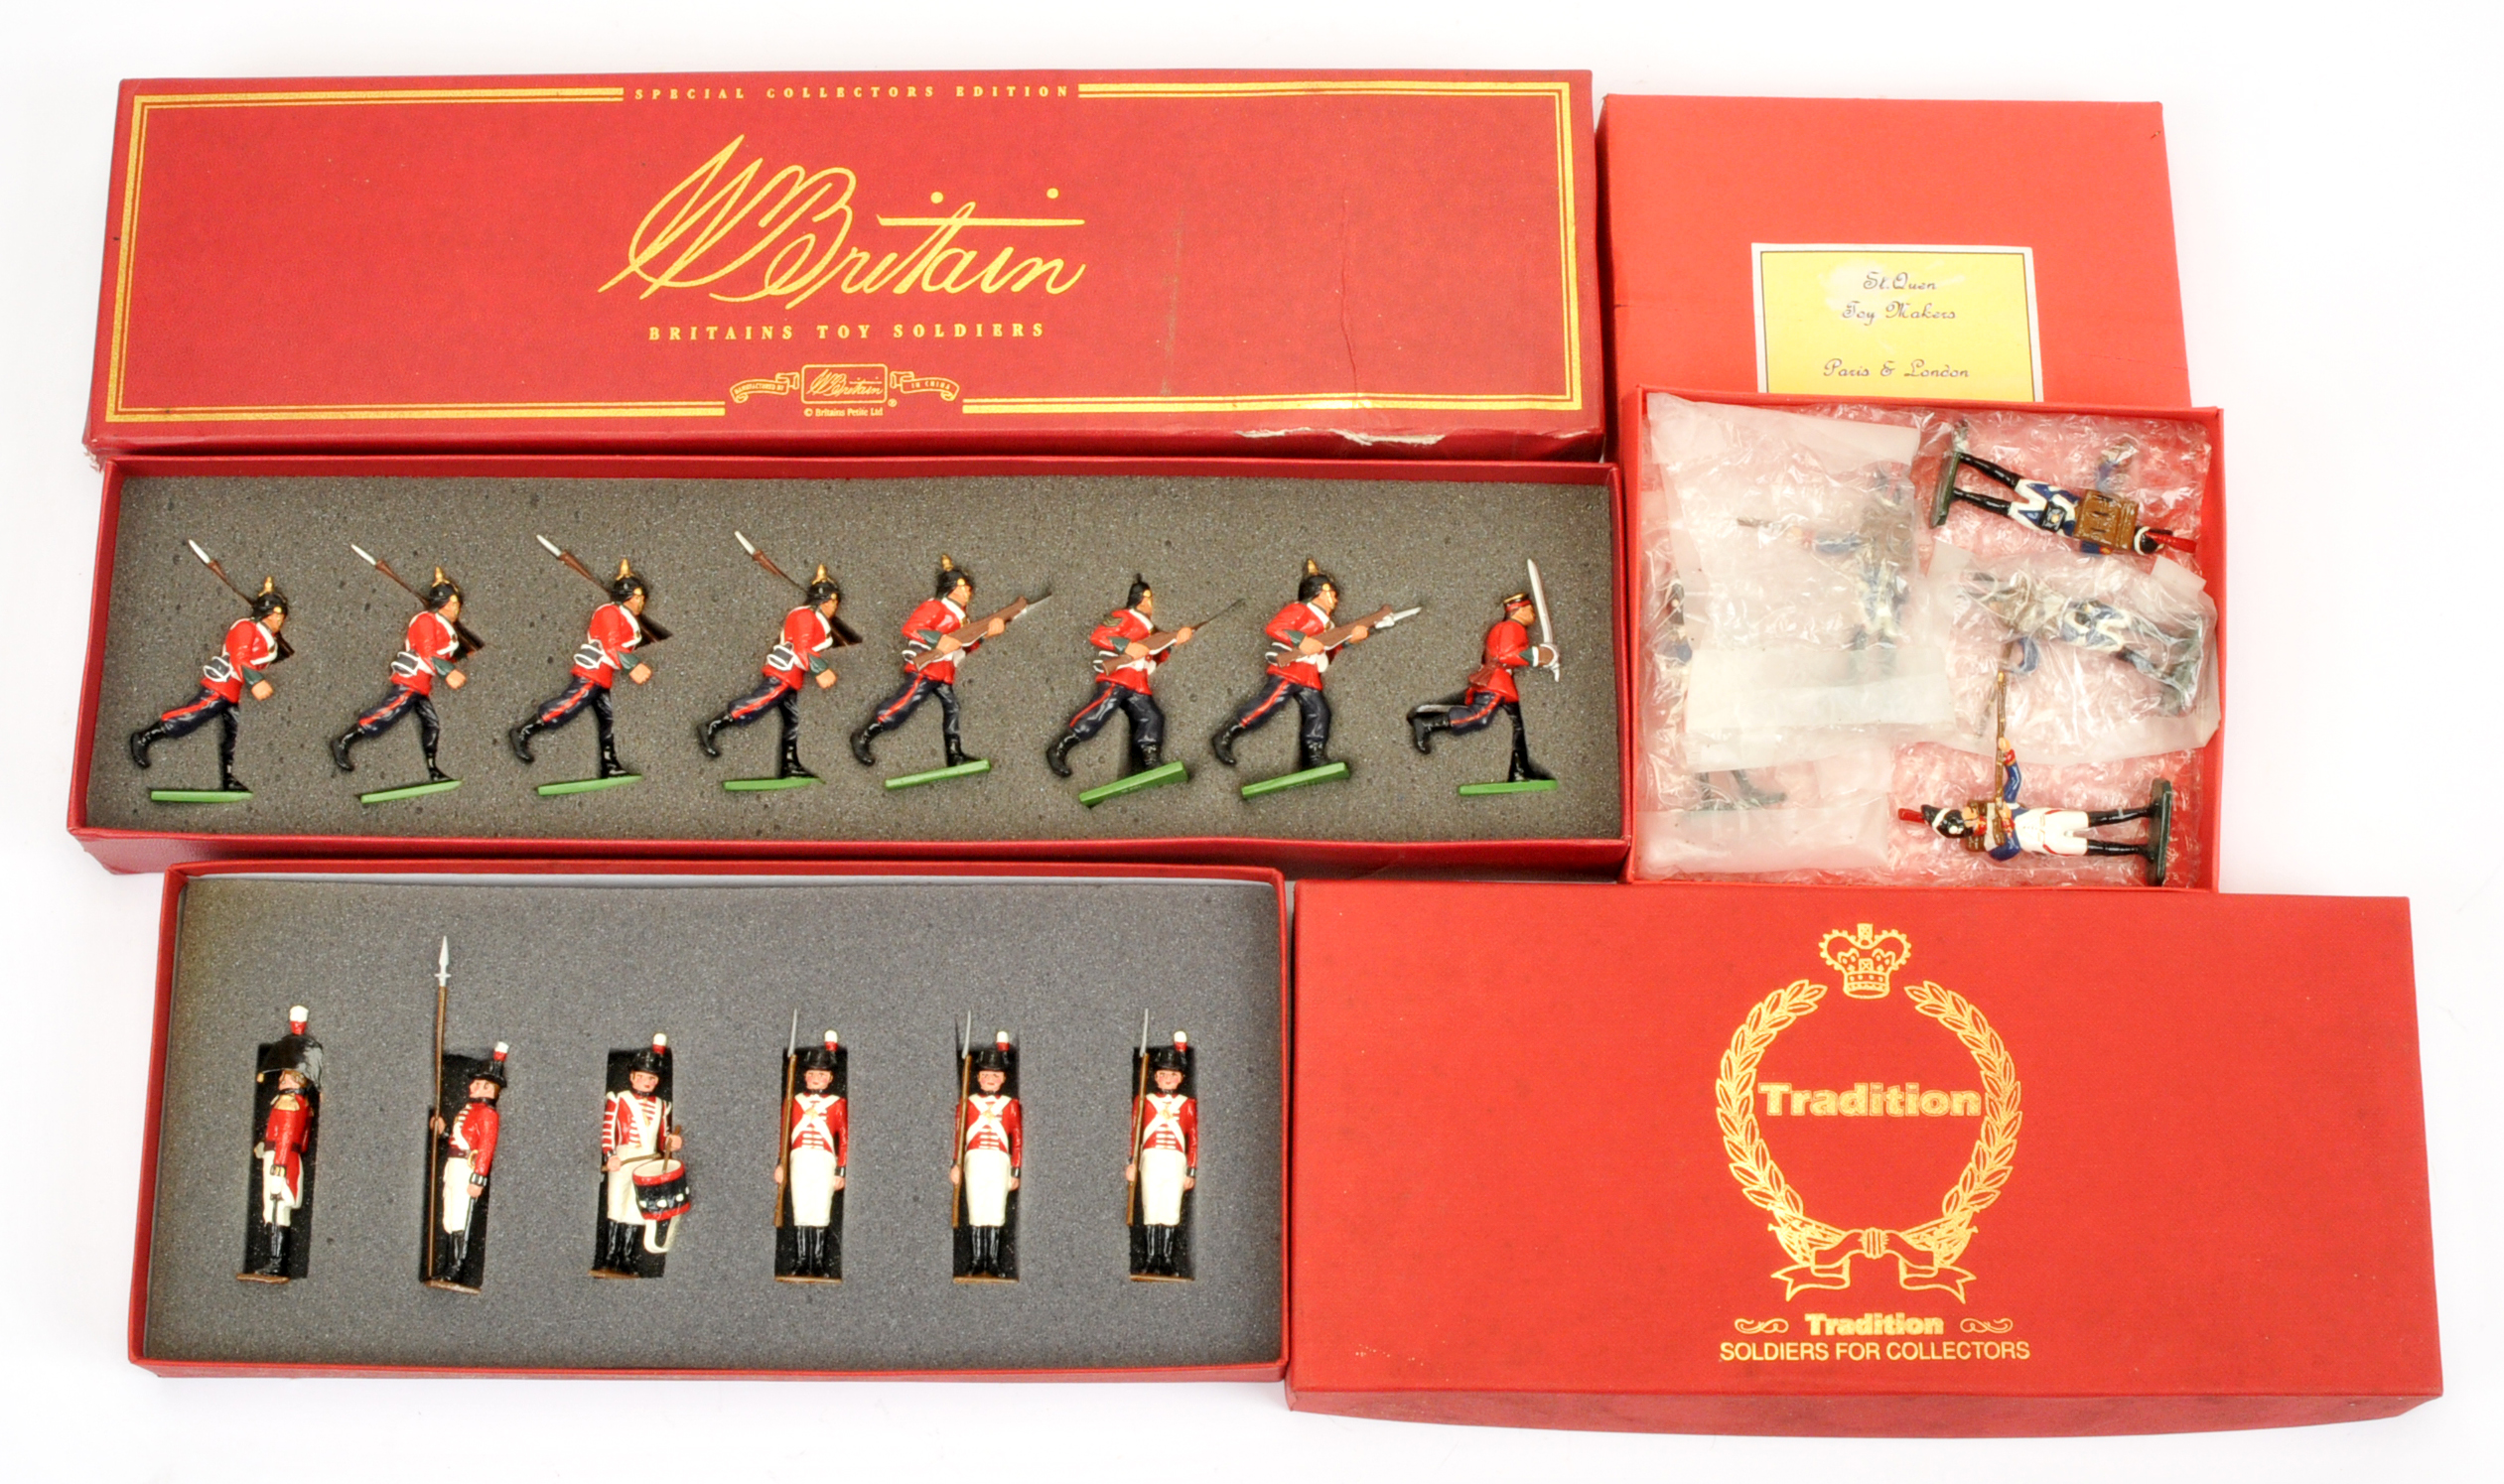 Britains, Tradition & Other - A Group of Metal Toy Soldier Sets